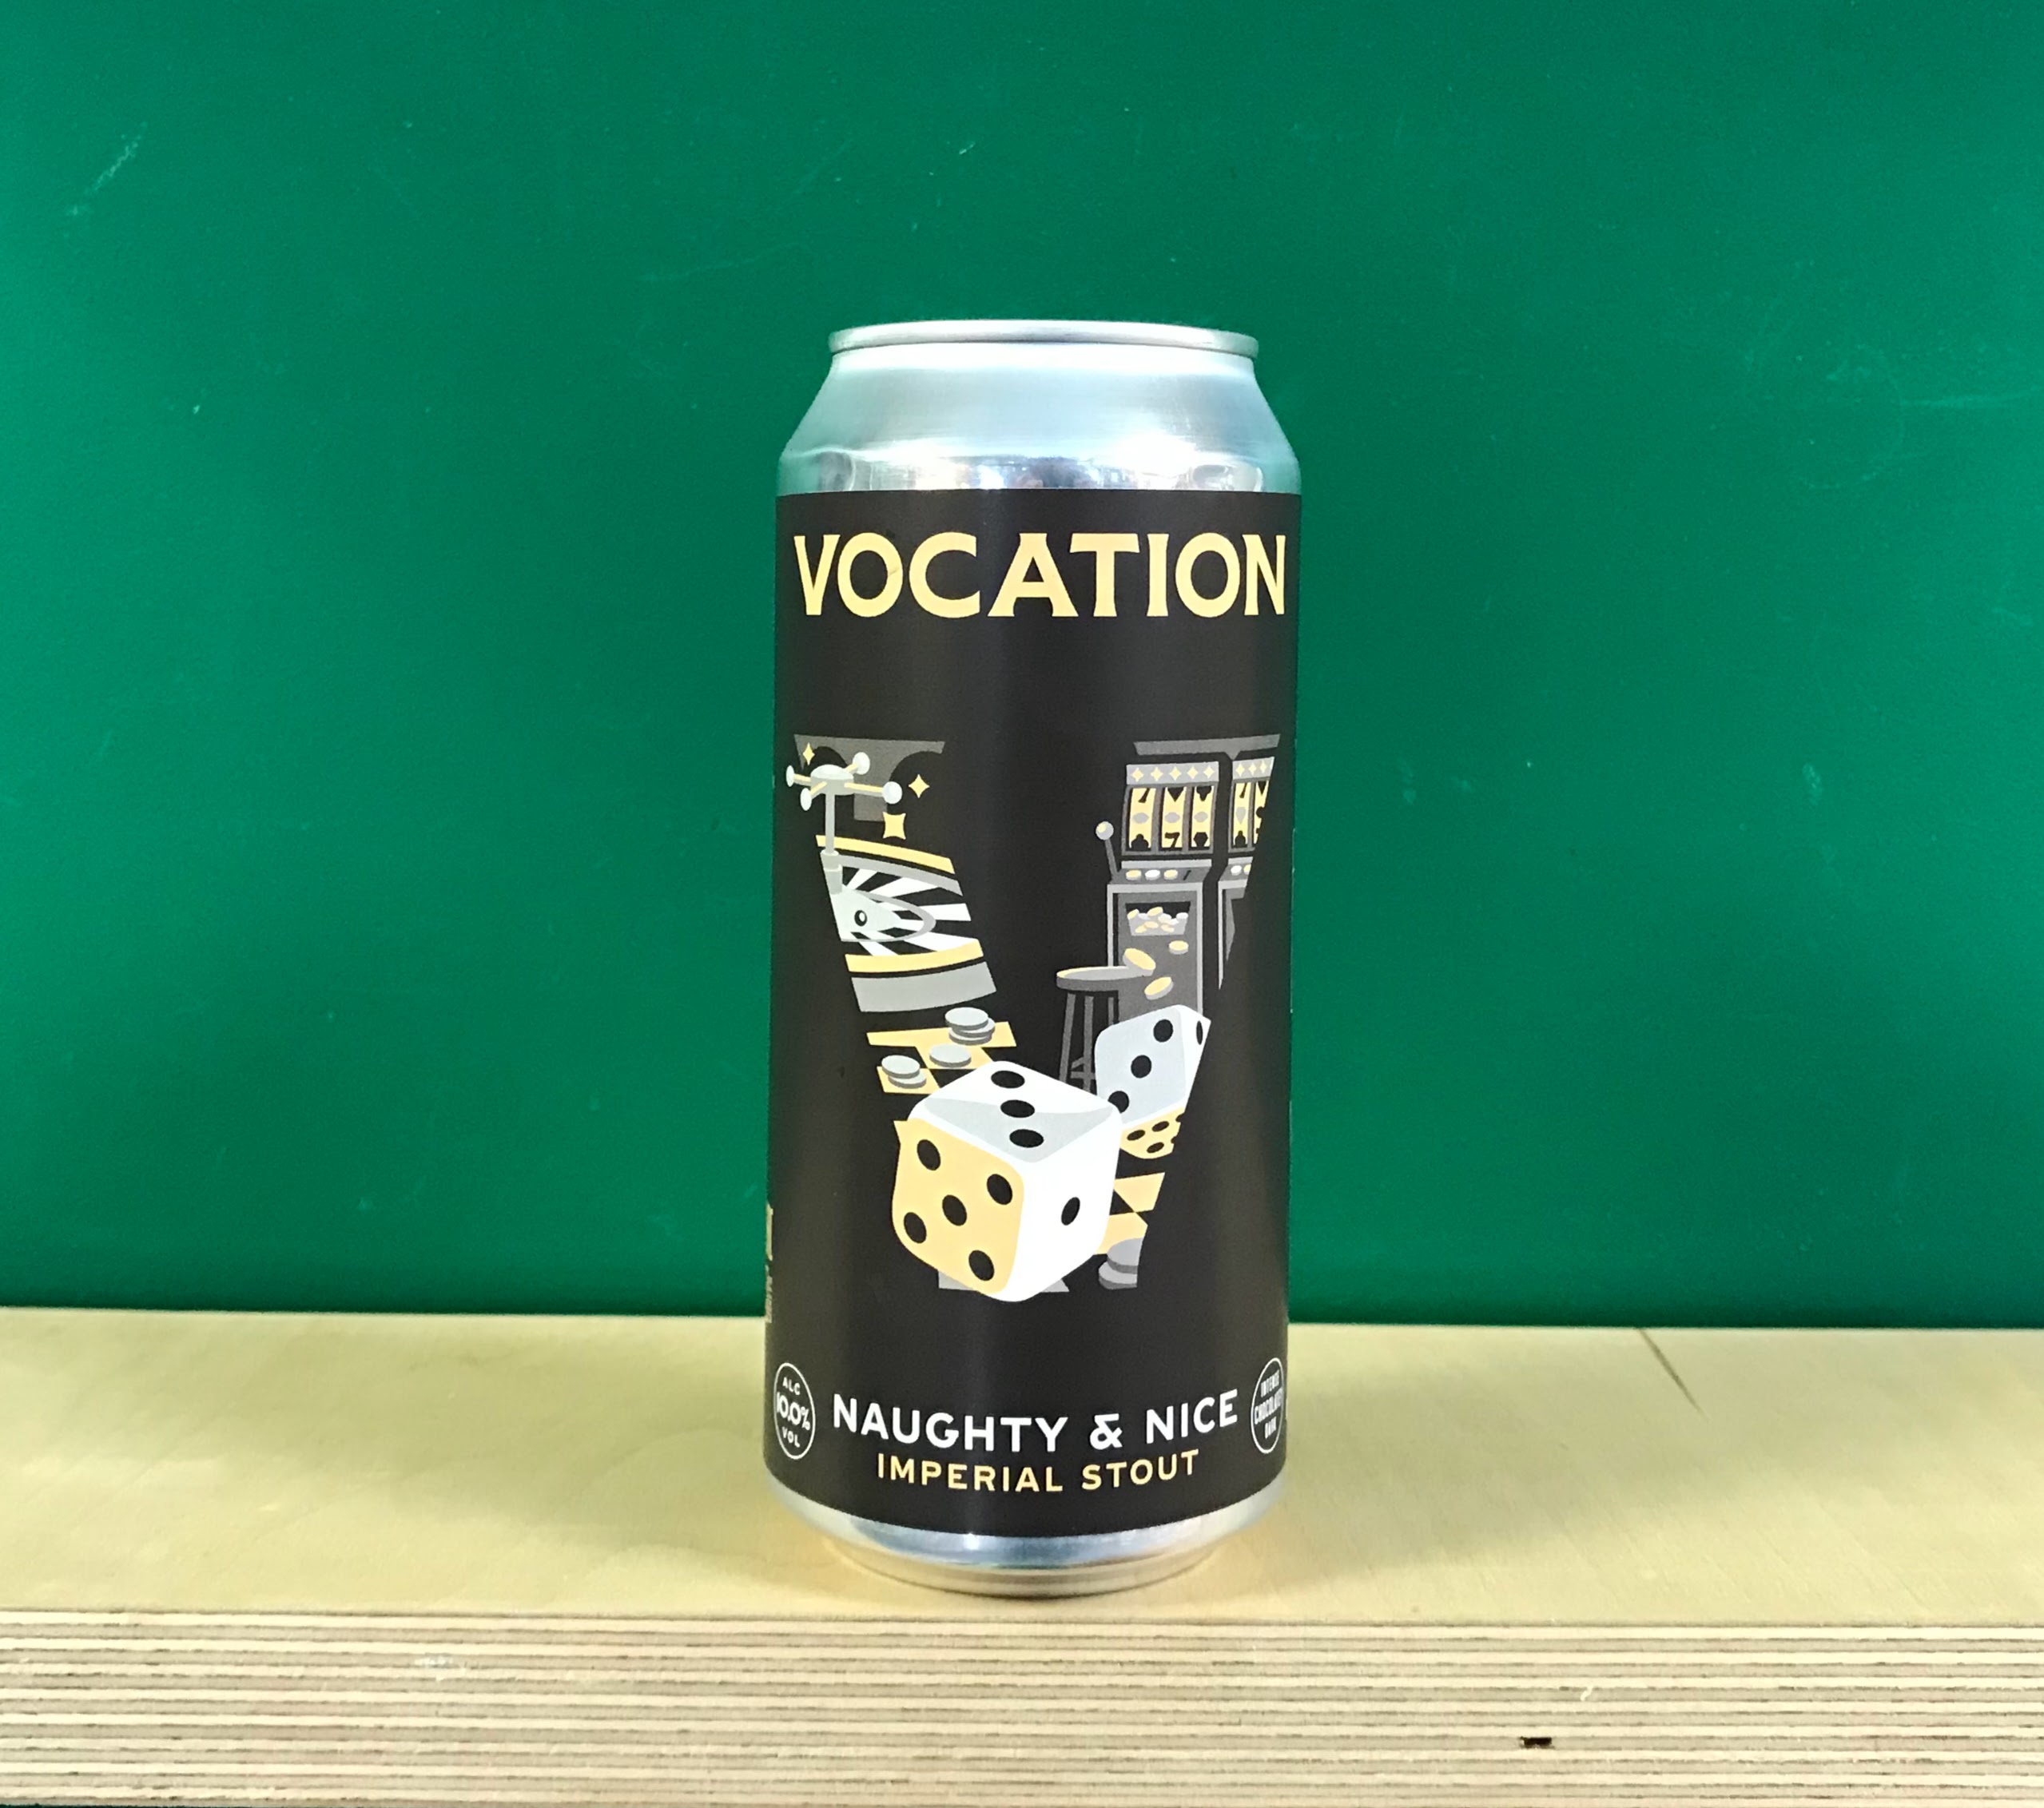 Vocation Naughty & Nice Imperial Stout